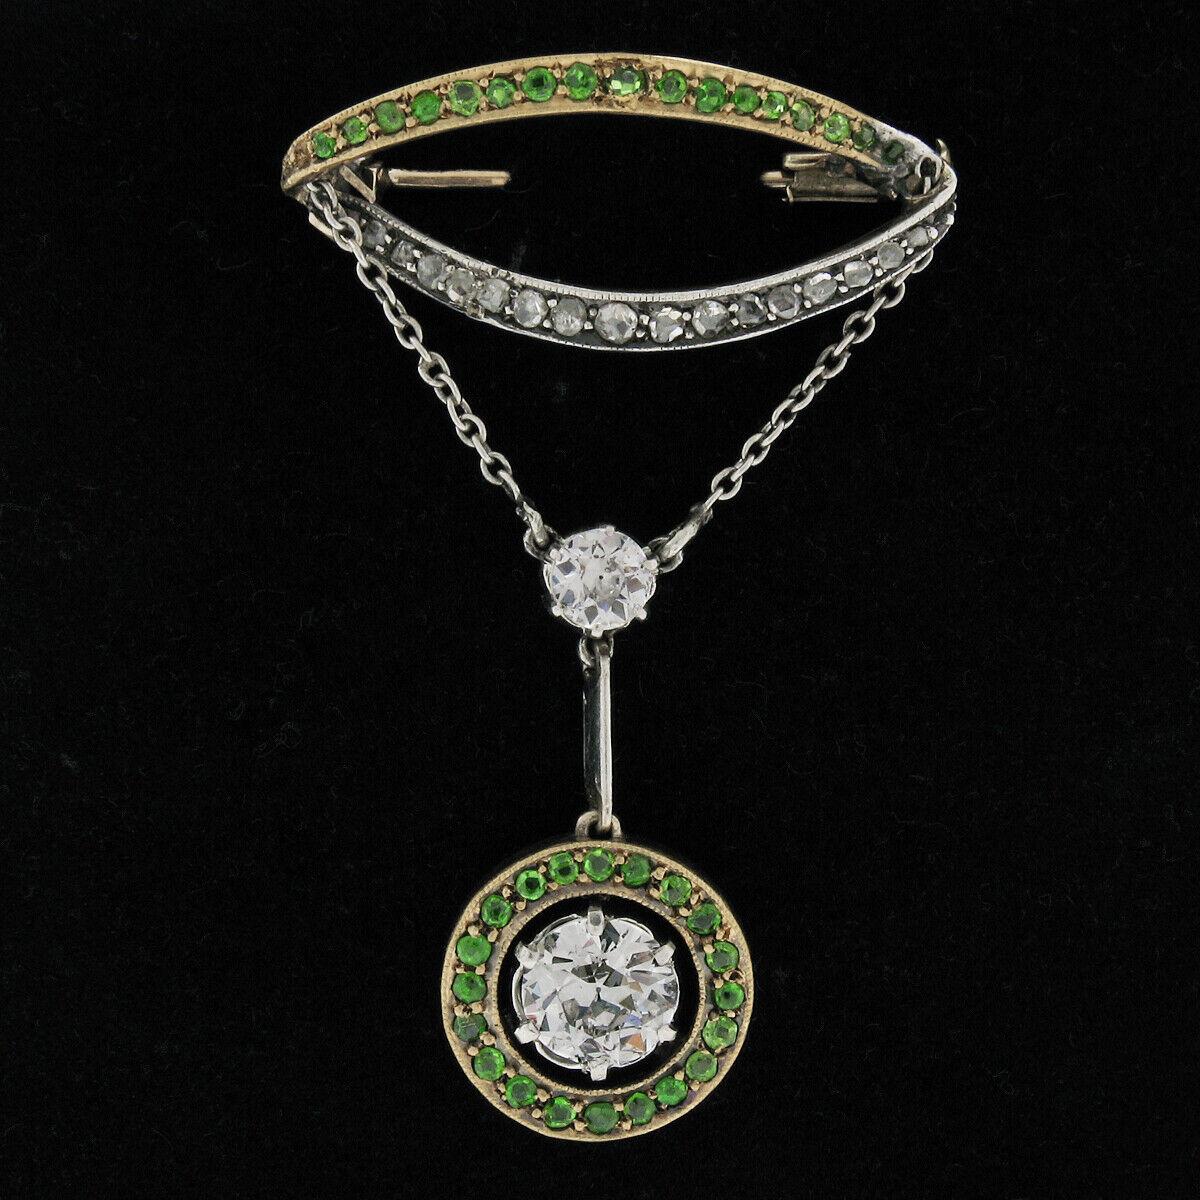 Here we have a very fine antique diamond and demantoid garnet dangle pin brooch crafted in solid 18k yellow gold during the early 1900's. It features a large, GIA certified 1.17 carats, old European cut diamond which is prong set at the center of